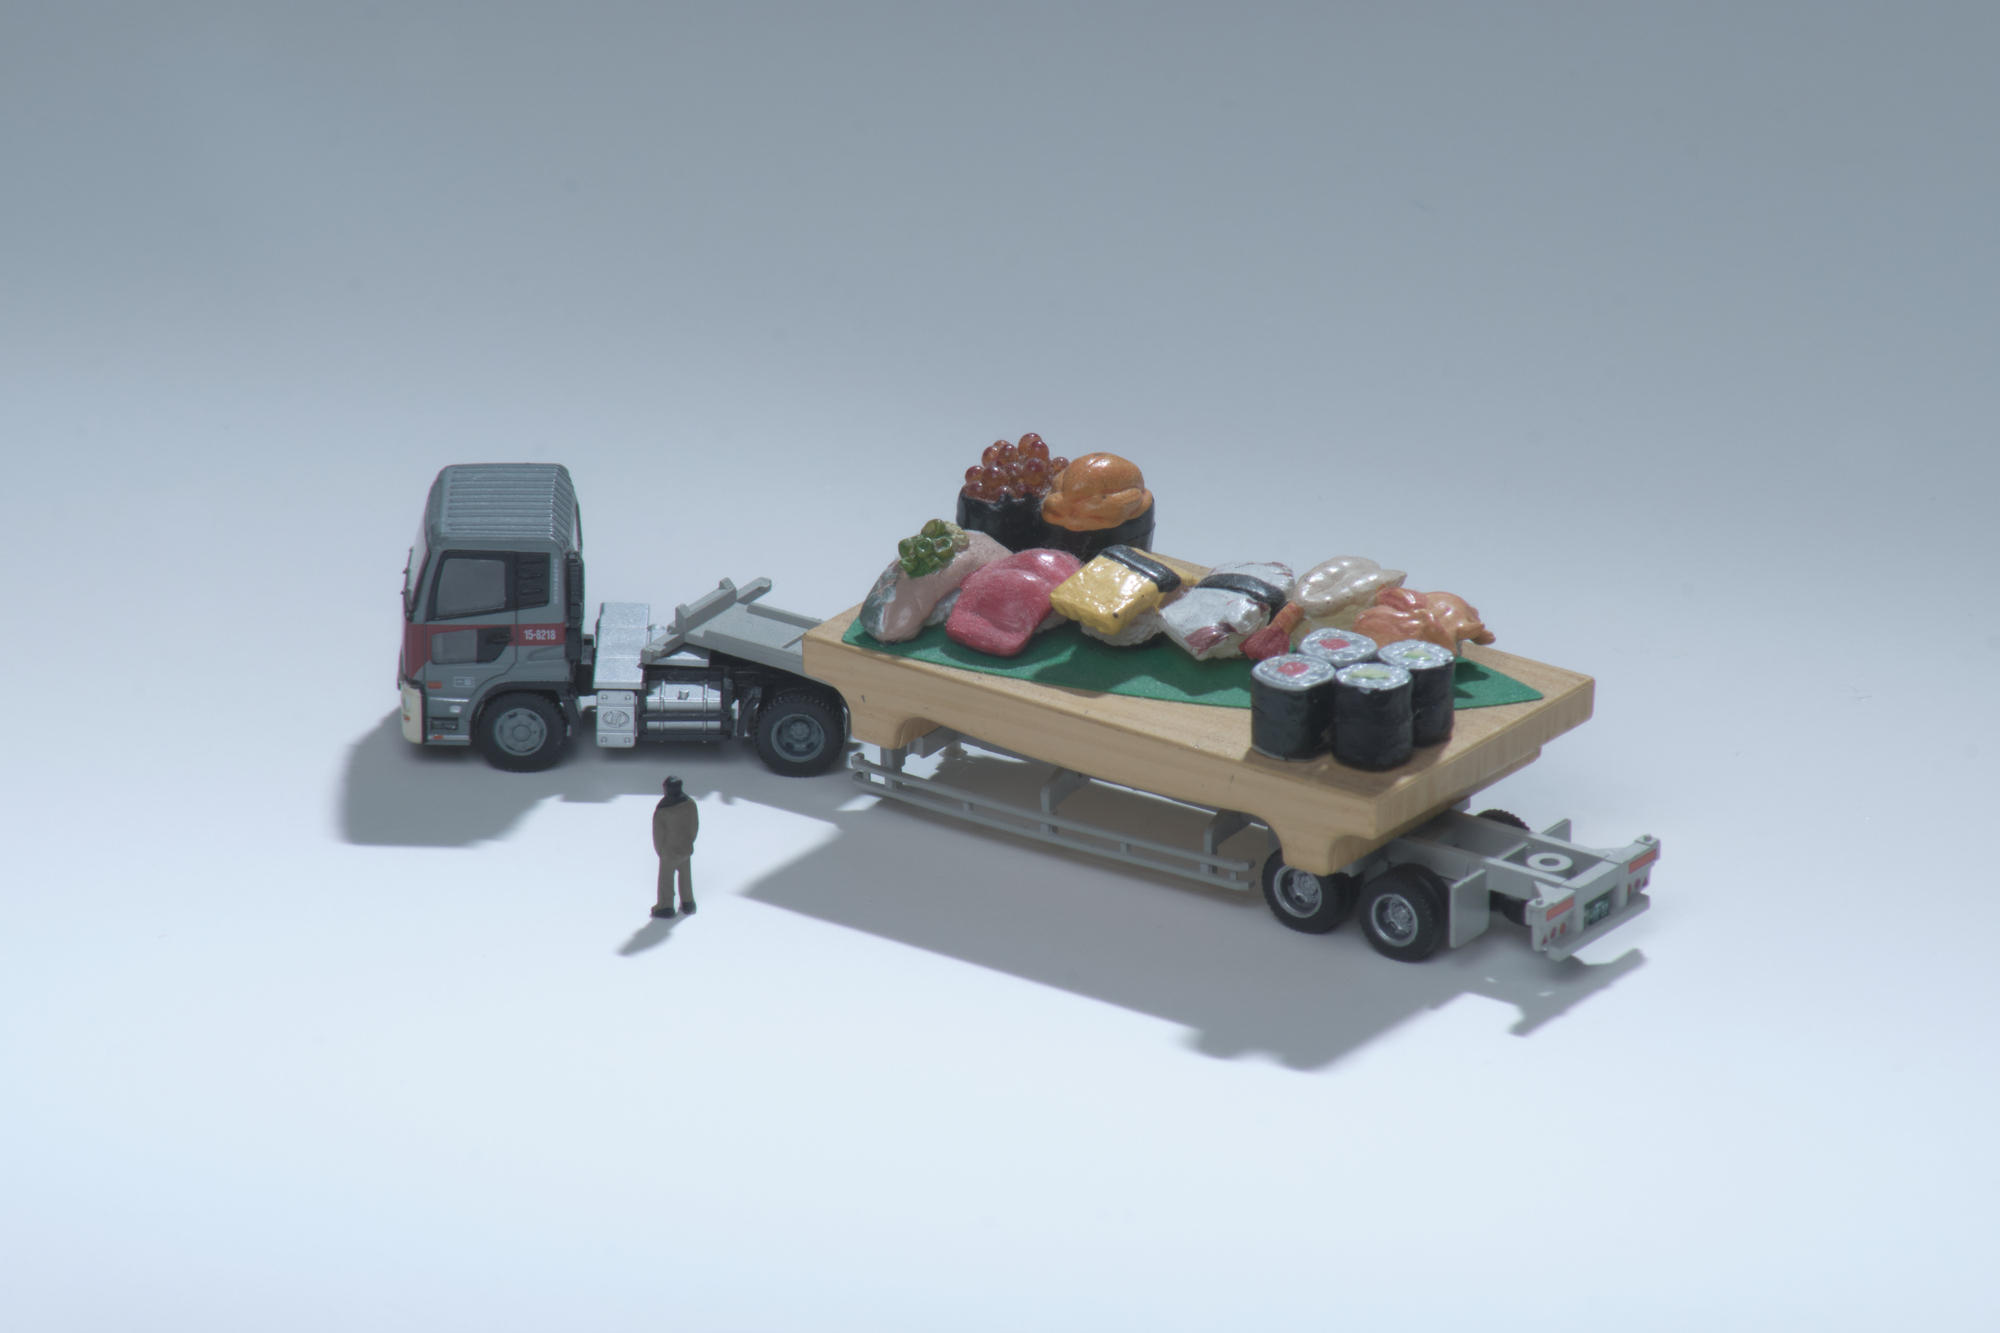 Man inspects flatbed truck carrying sushi.